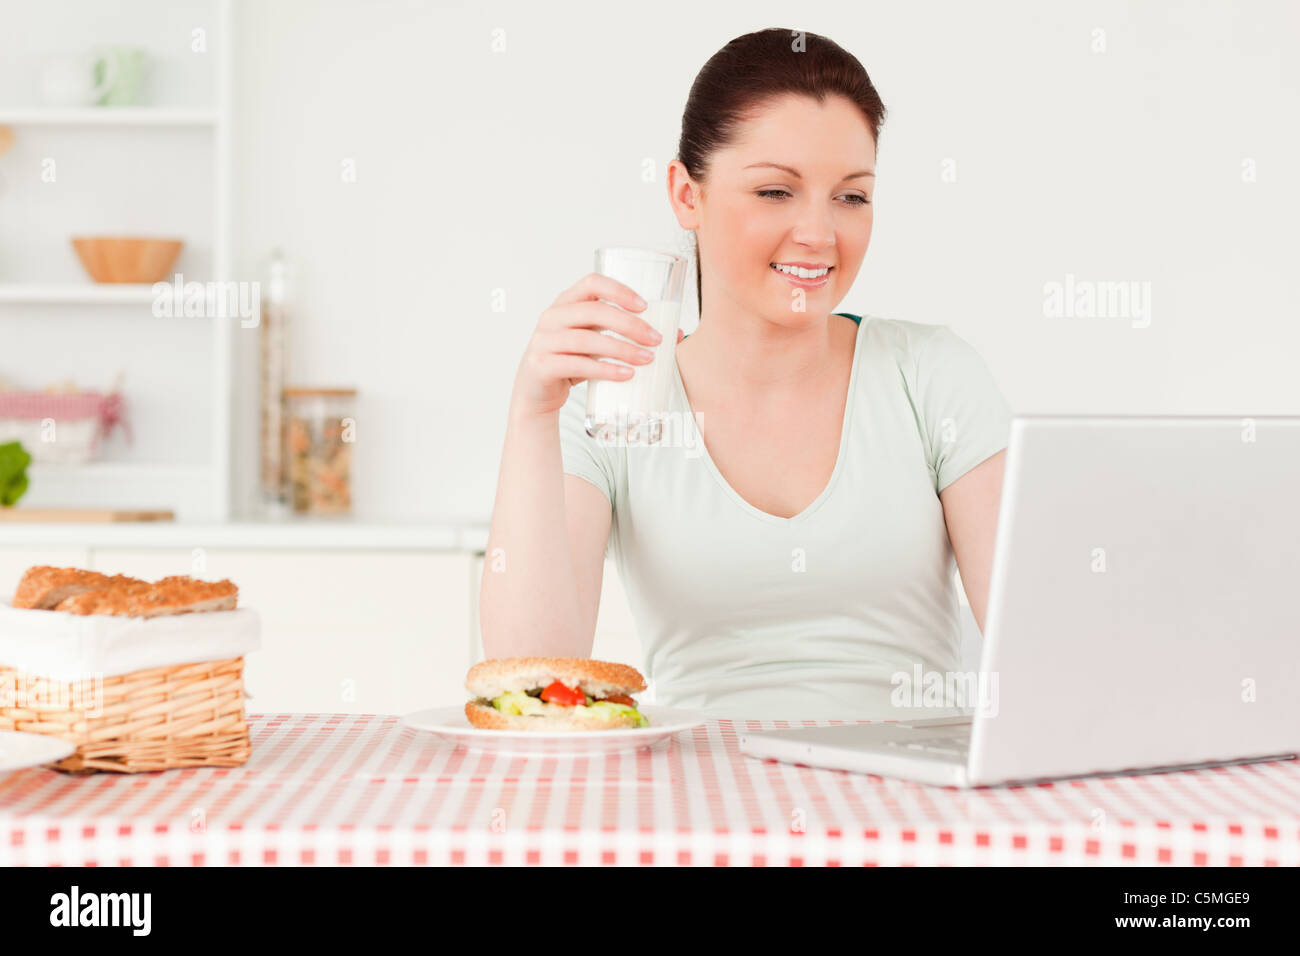 Smiling woman relaxing on her laptop while drinking a glass of milk Stock Photo